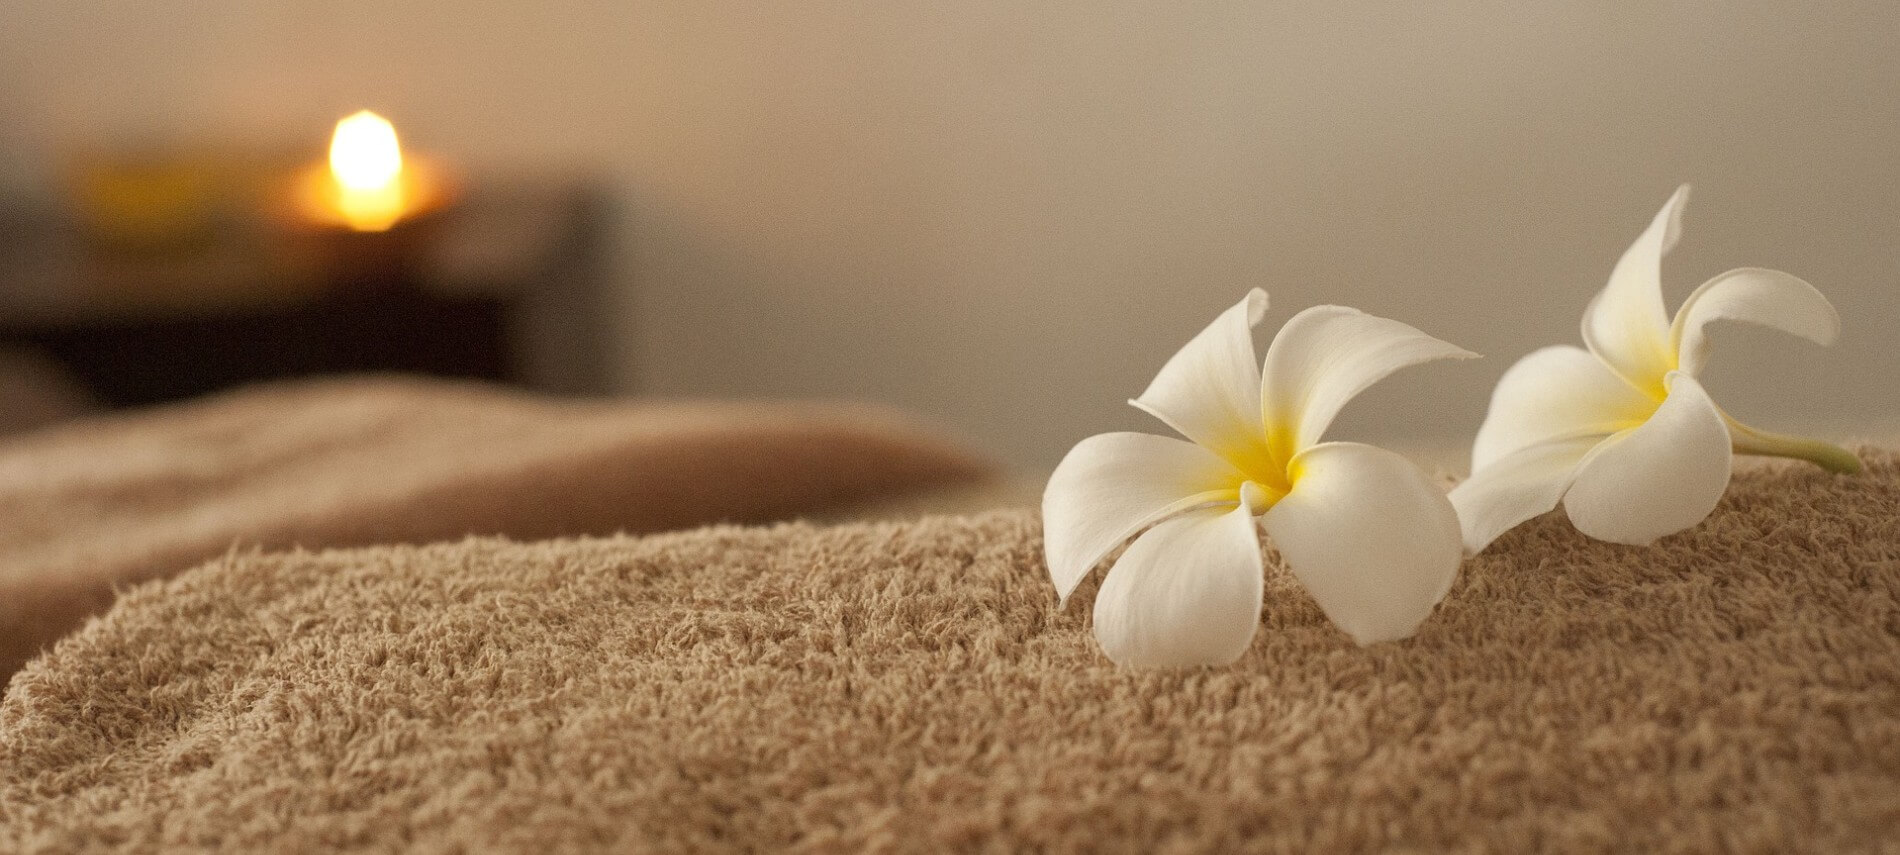 Two white flowers lie on a folded beige towel with a candle burning in the background.